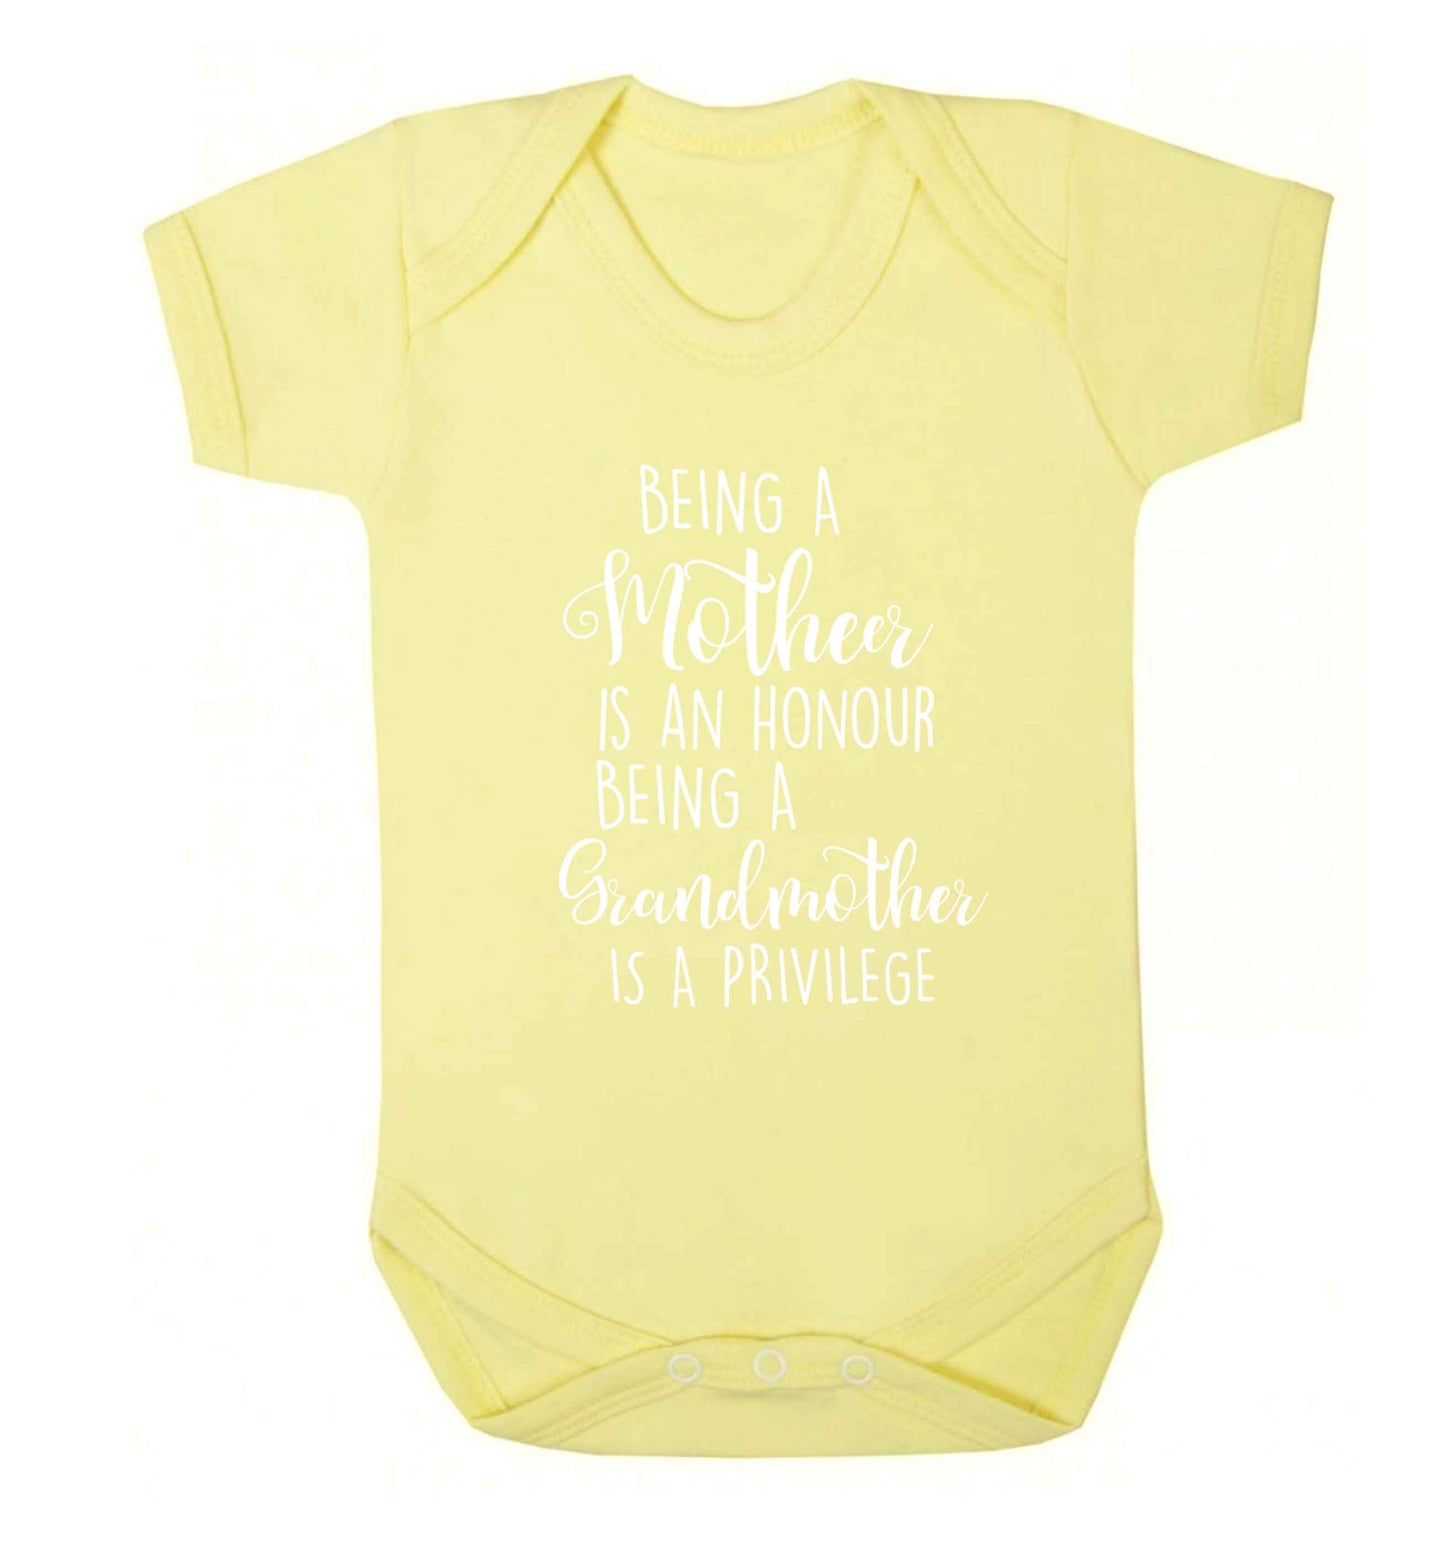 Being a mother is an honour being an grandmother is a privilege Baby Vest pale yellow 18-24 months